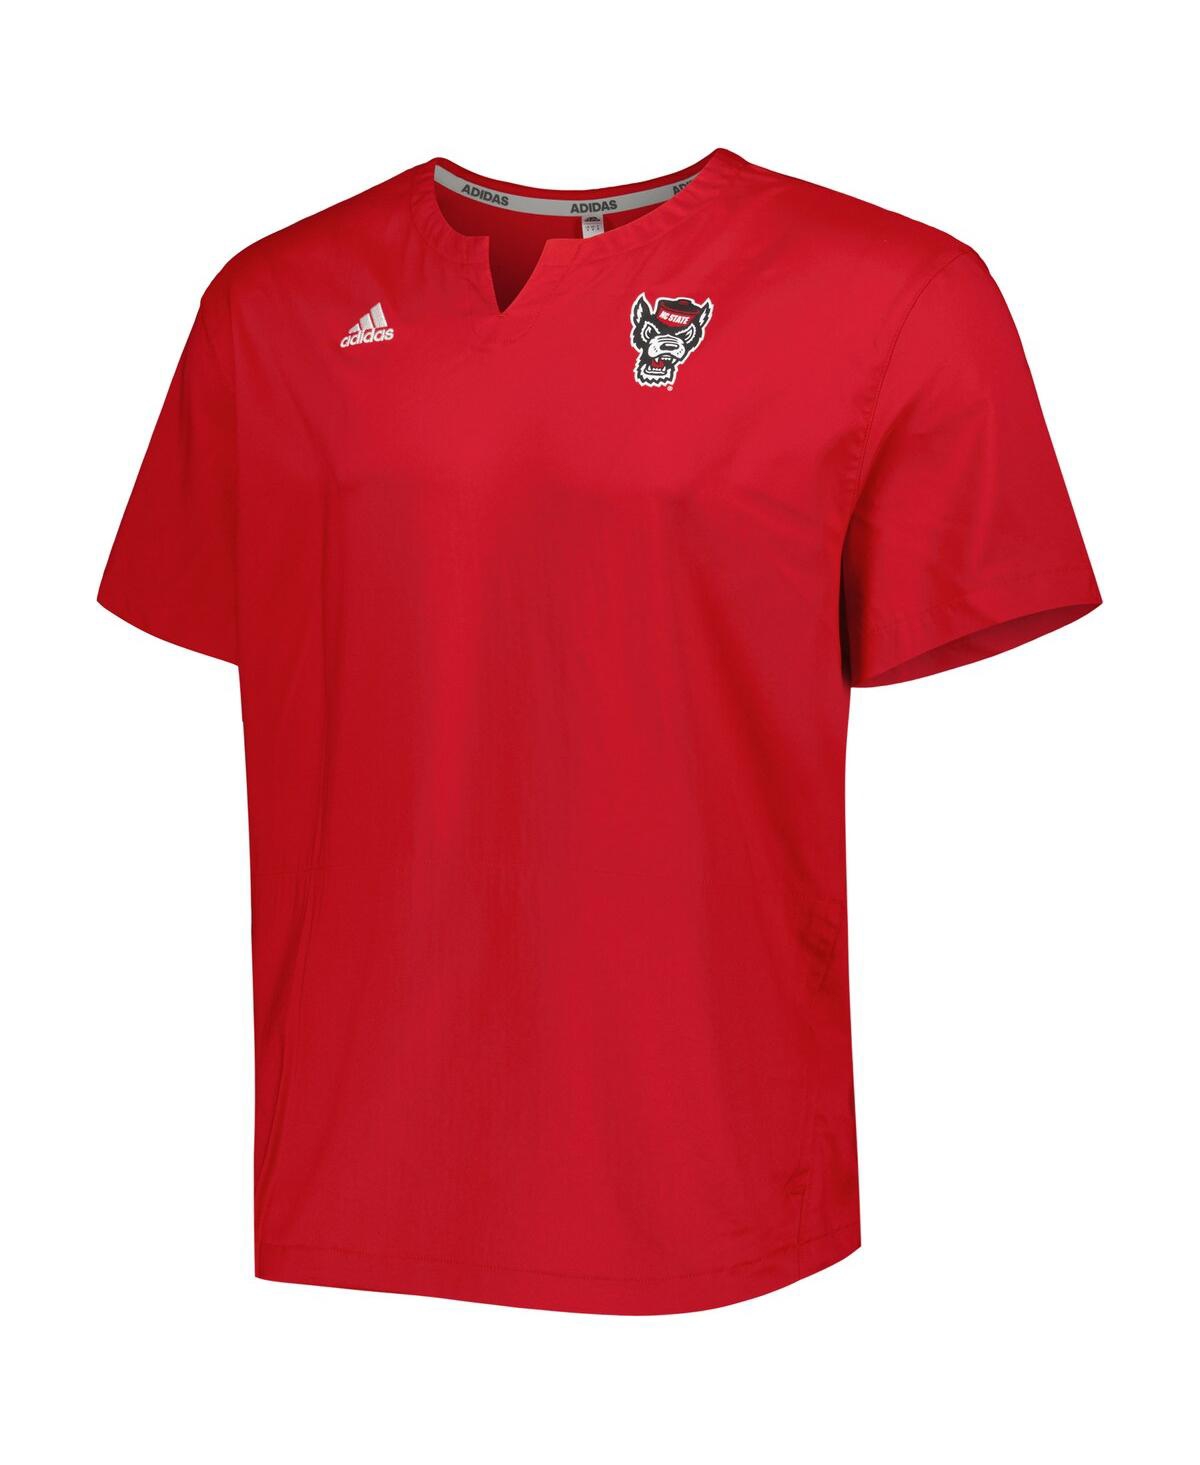 Shop Adidas Originals Men's Adidas Red Nc State Wolfpack Notch Neck Iron Cage Top